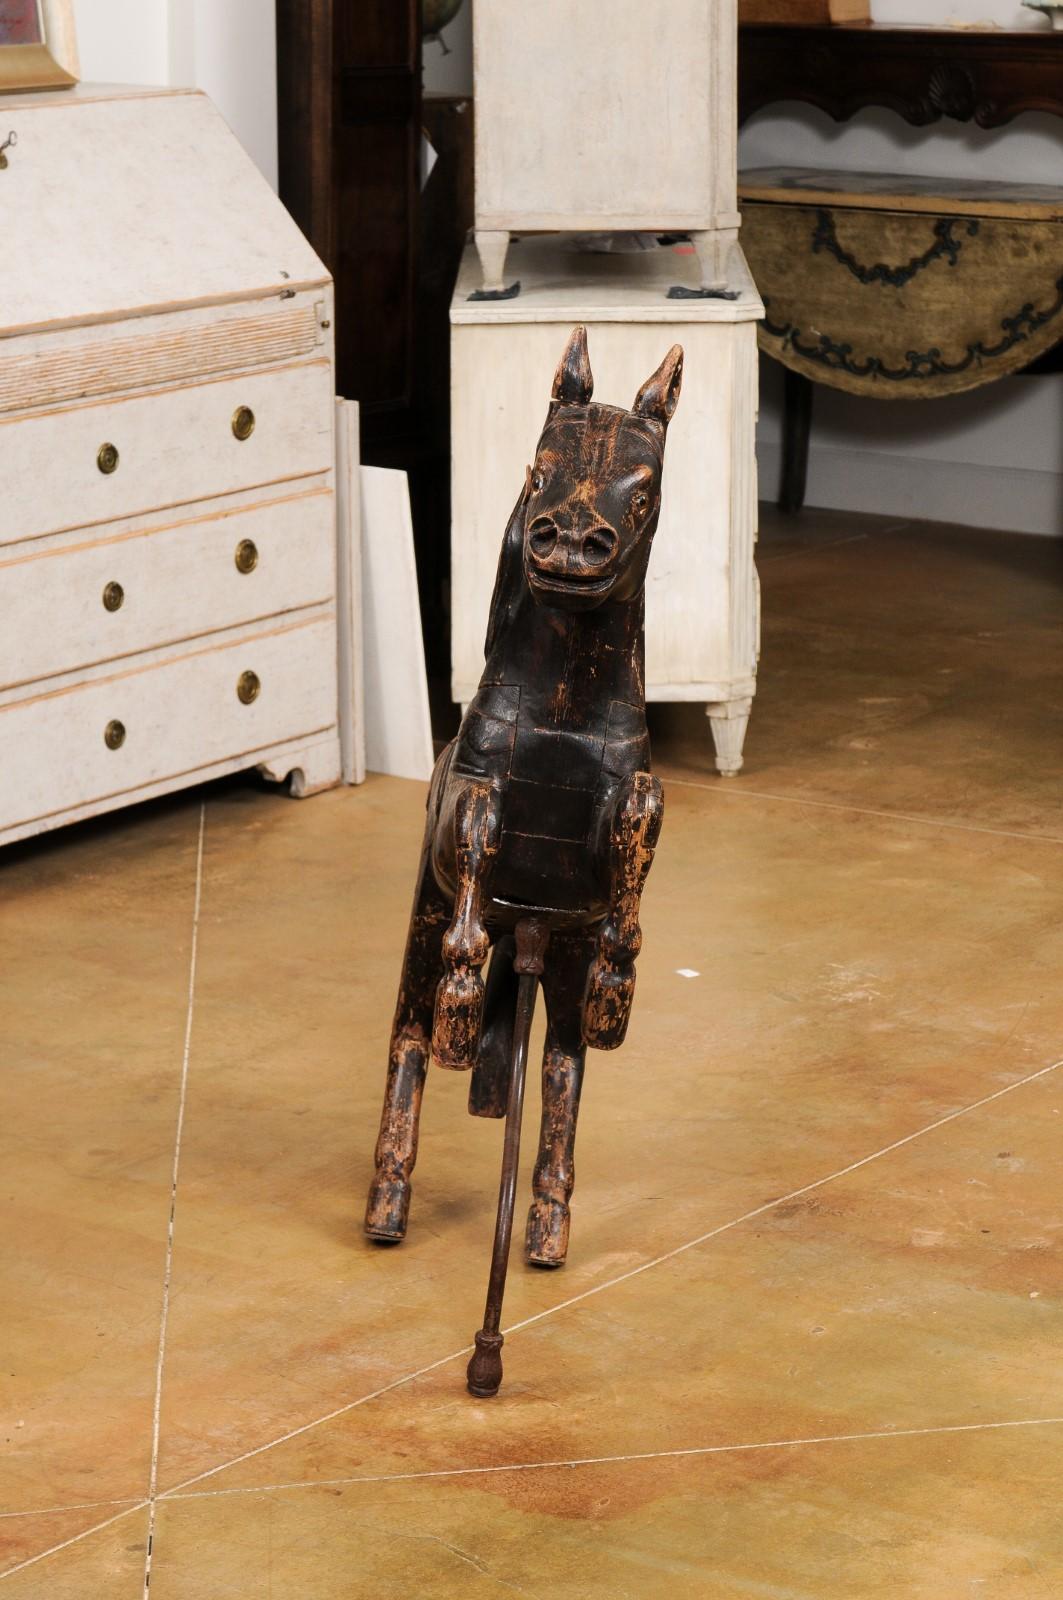 A French carved wooden carousel horse sculpture from the late 19th century, with dark paint, glass eyes, supporting bar and distressed appearance. Created in France during the last quarter of the 19th century, this carved wooden sculpture depicts a